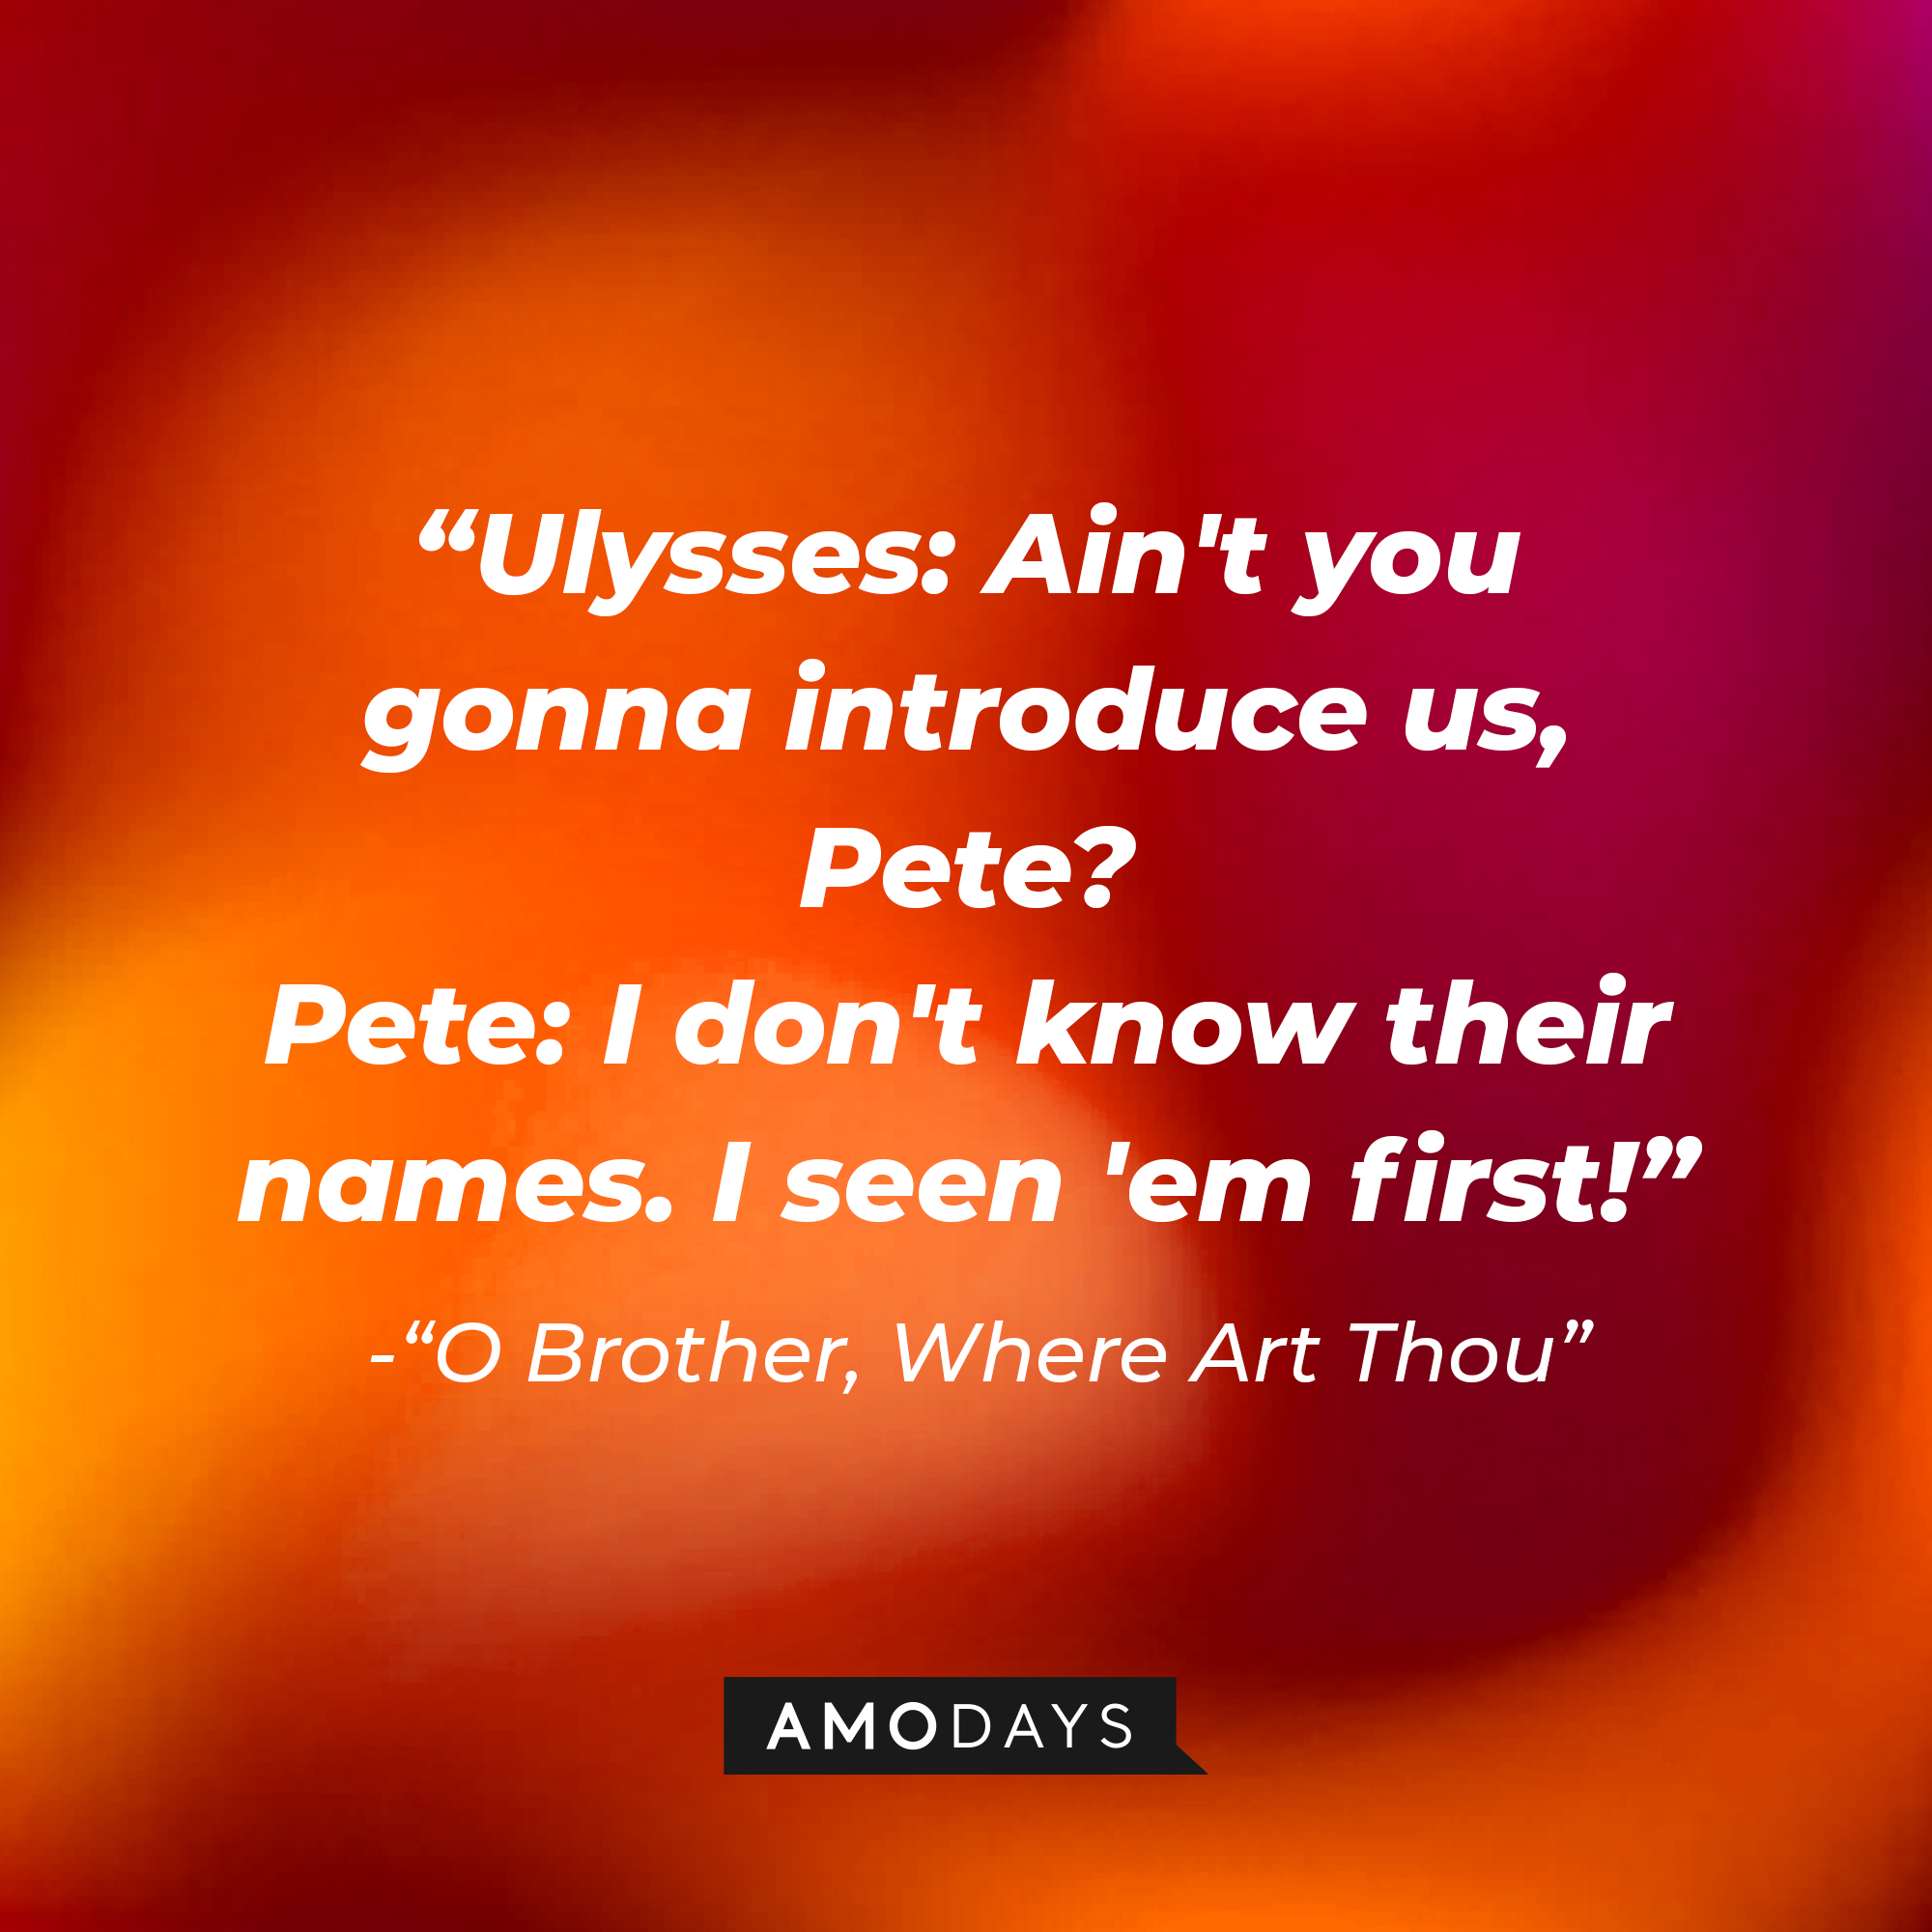 Pete Hogwallop's dialogue in "O Brother, Where Art Thou:" "Ulysses: Ain't you gonna introduce us, Pete? ; Pete: I don't know their names. I seen 'em first!" | Source: AmoDays